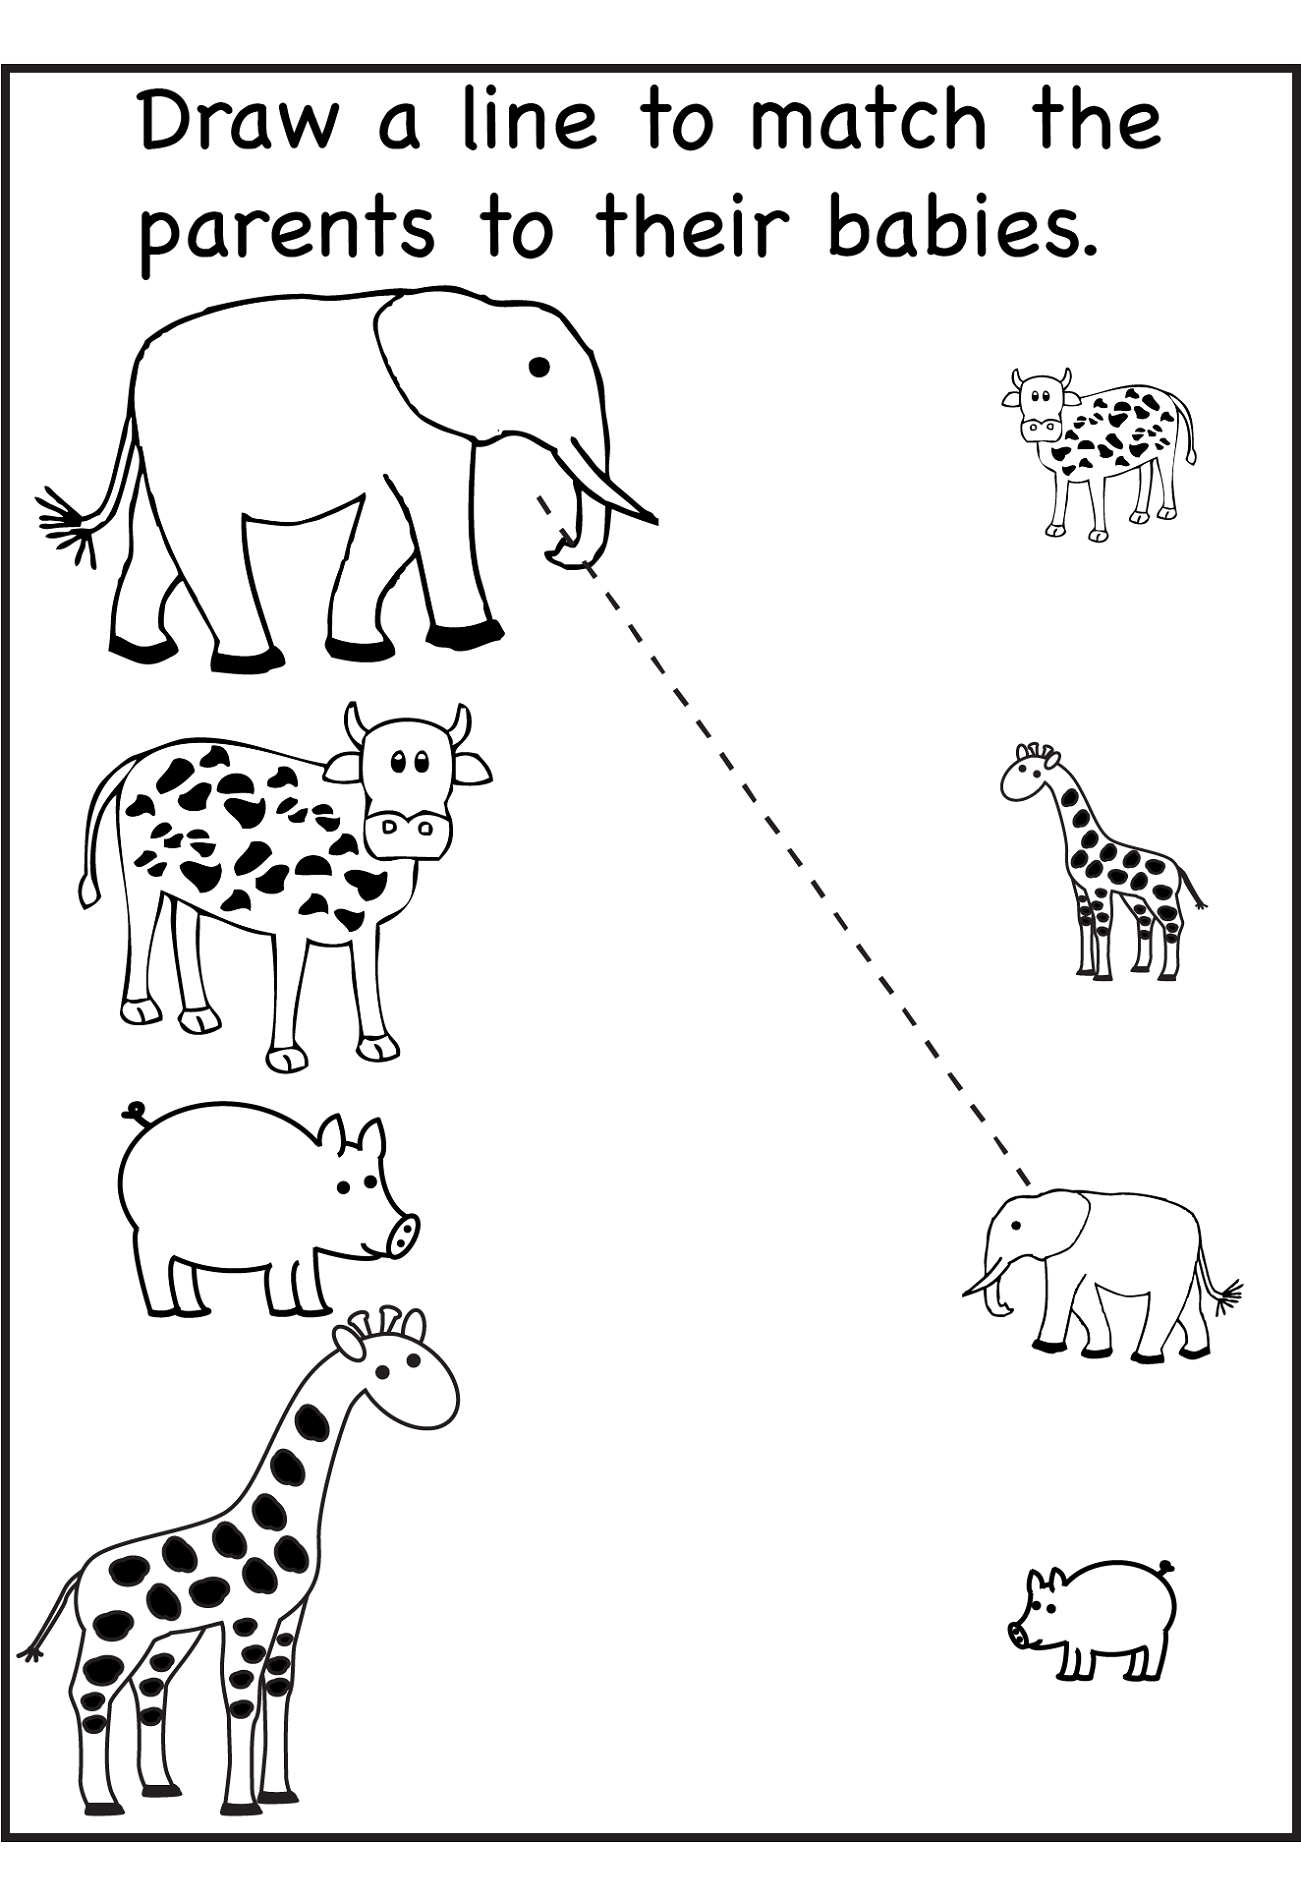 Activity Sheet for Kids Draw a Line